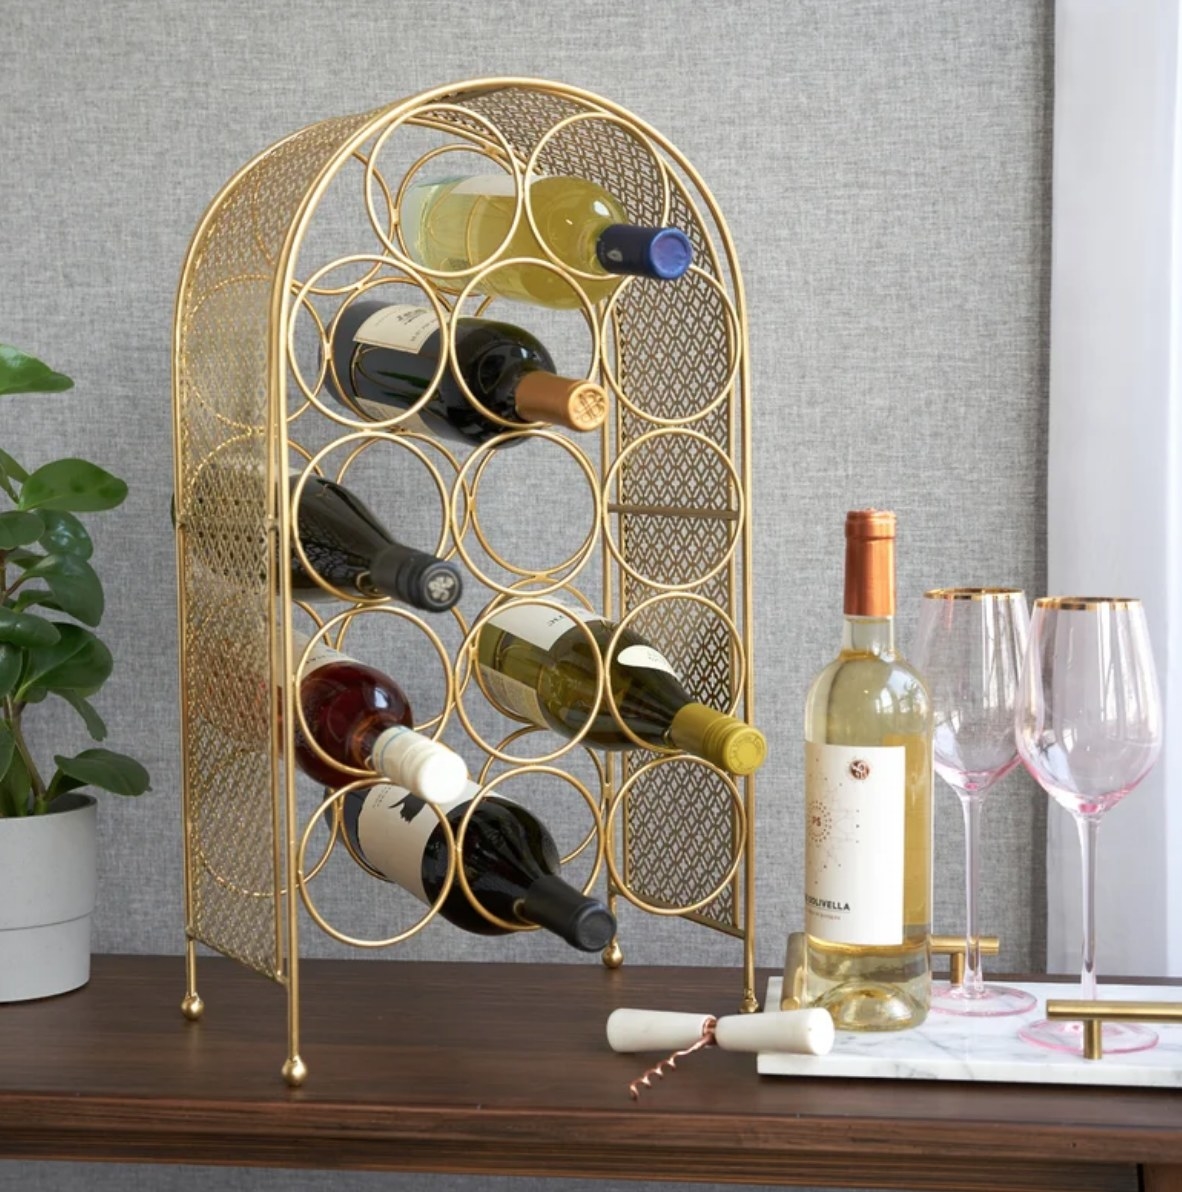 A gold 14-bottle arched wine rack